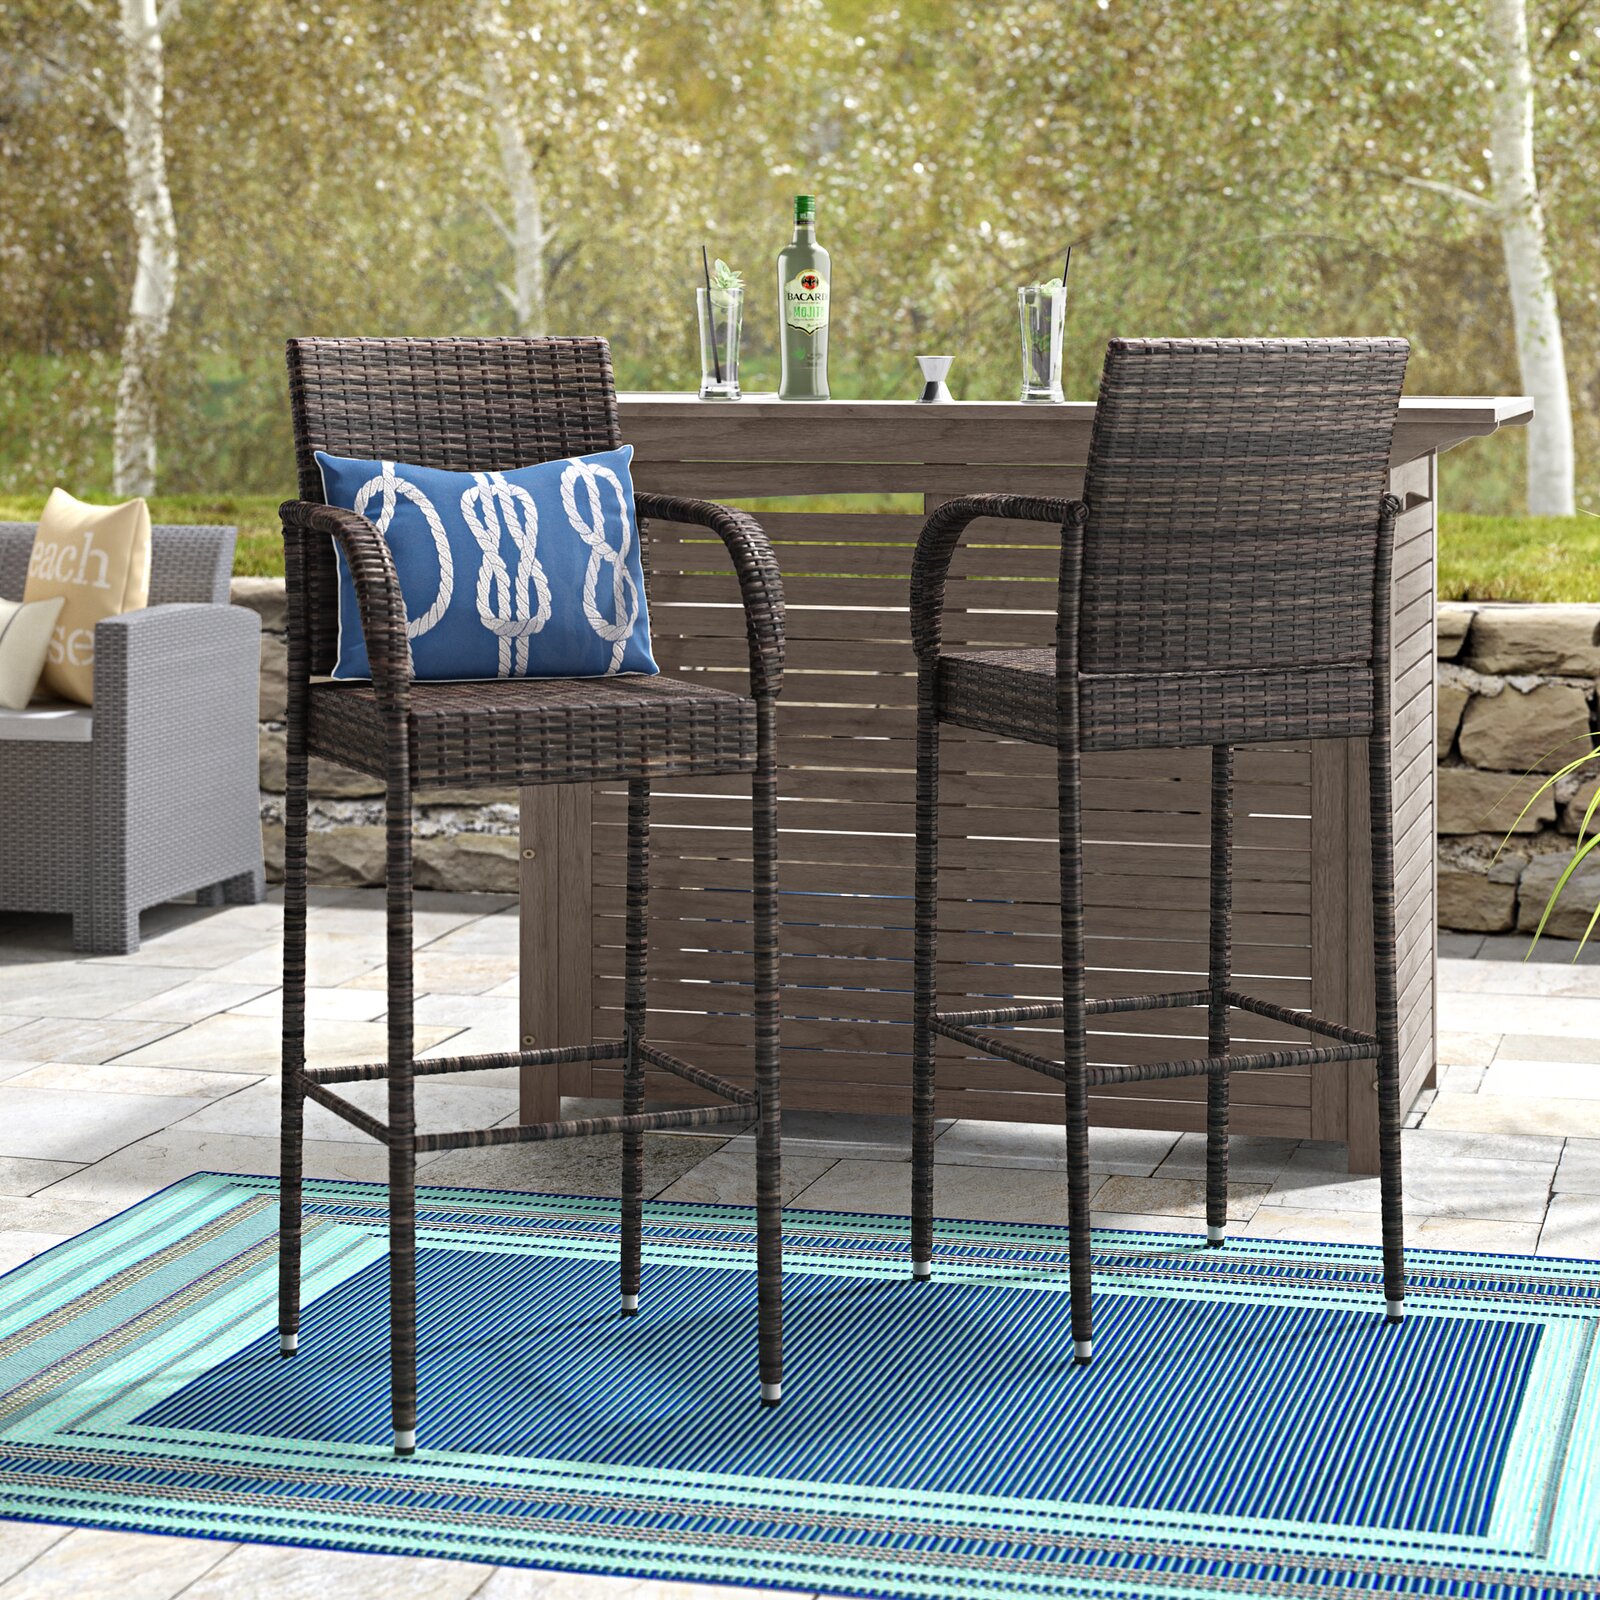 Outdoor Bar Stools 24 inches High, Outdoor Patio Furniture Wicker Rattan Bar Stool with Armrest and Footrest, Patio Bar Chairs for Garden Pool Lawn Backyard, Bar Stools with Back Sets of 2, W2099 - image 4 of 11